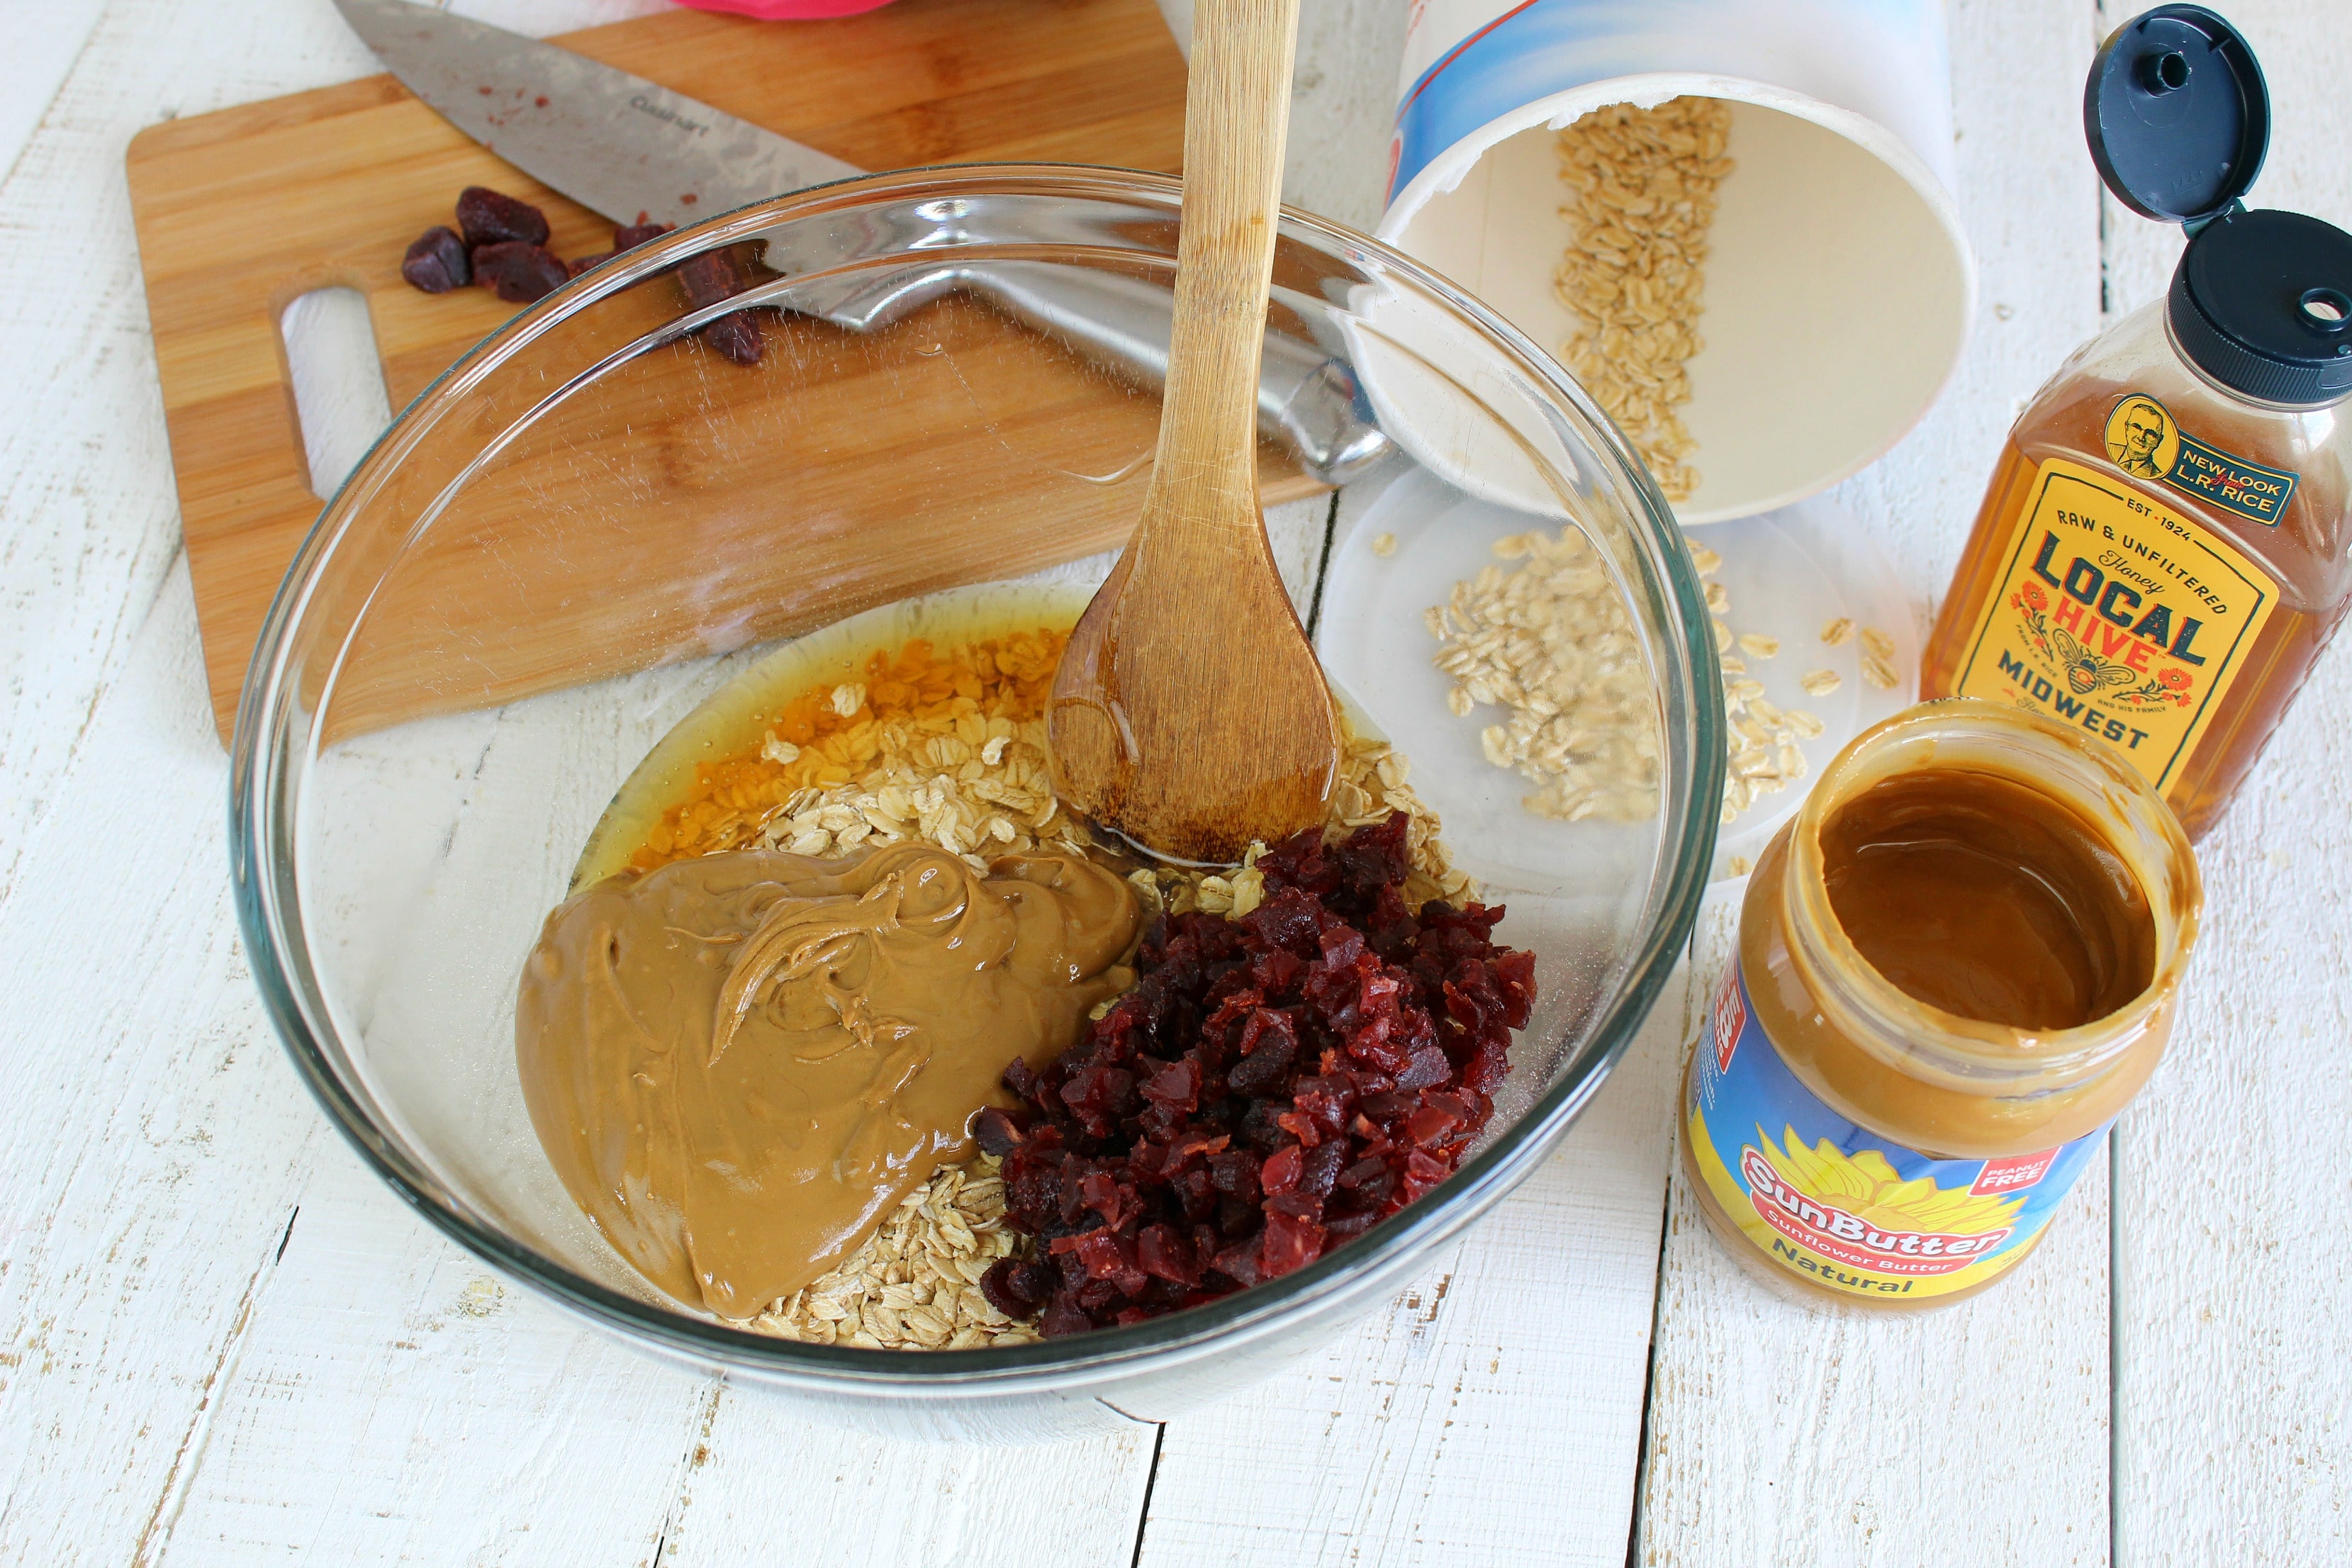 Mix oats, peanut butter, dried strawberries and honey together in a bowl